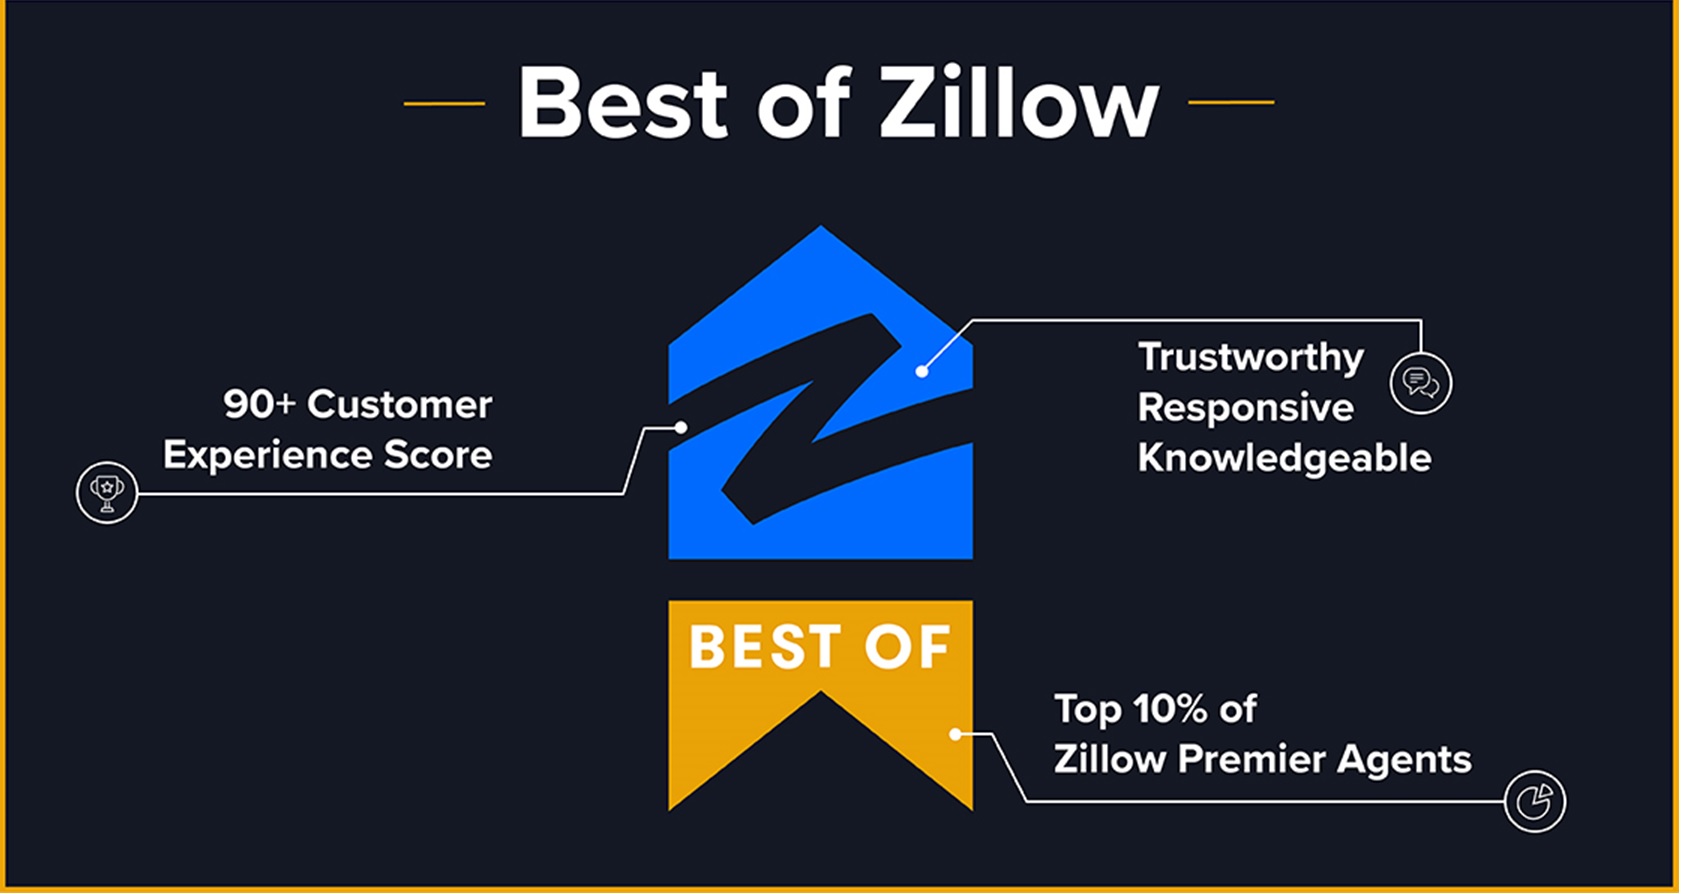 Best of Zillow Designation Awarded to Top Agent Jonathan Slater — Scores in Top 1%